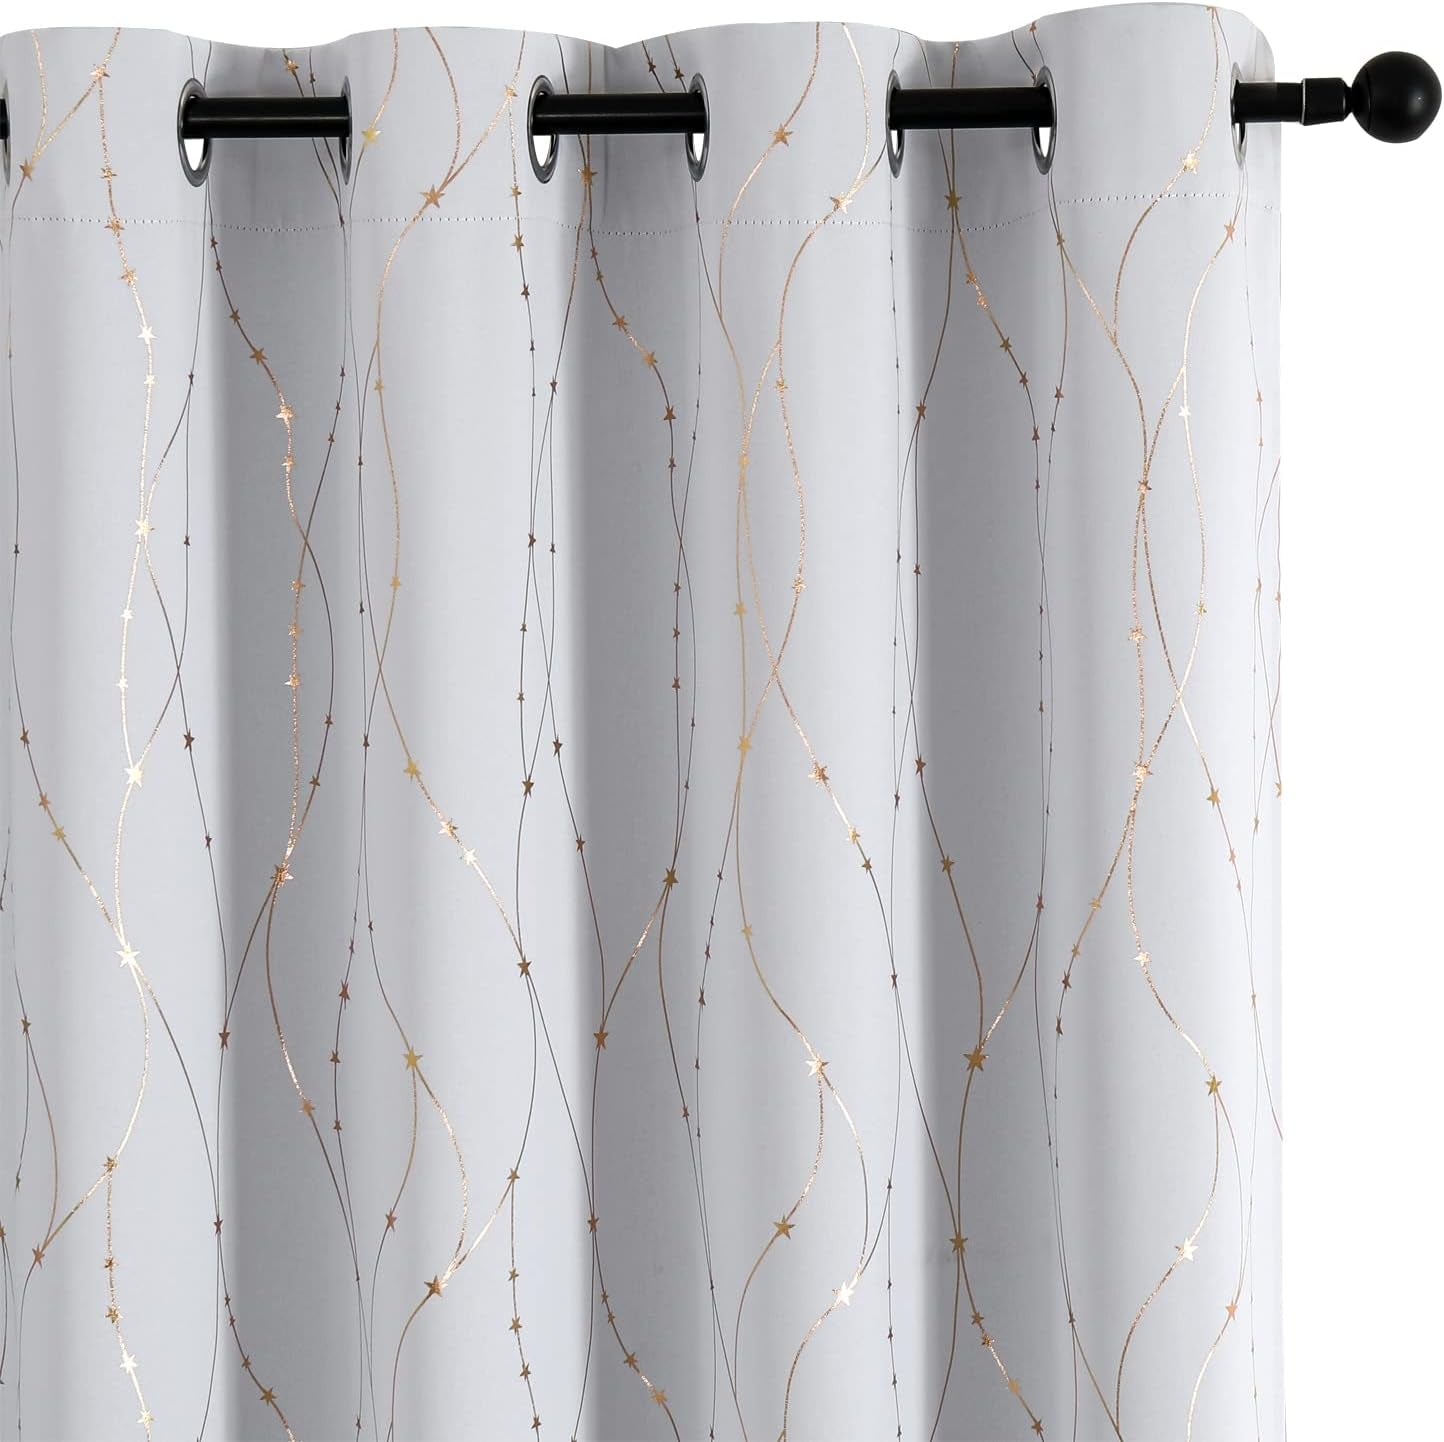 SMILE WEAVER Black Blackout Curtains for Bedroom 72 Inch Long 2 Panels,Room Darkening Curtain with Gold Print Design Noise Reducing Thermal Insulated Window Treatment Drapes for Living Room  SMILE WEAVER Greyish White Gold 52Wx96L 